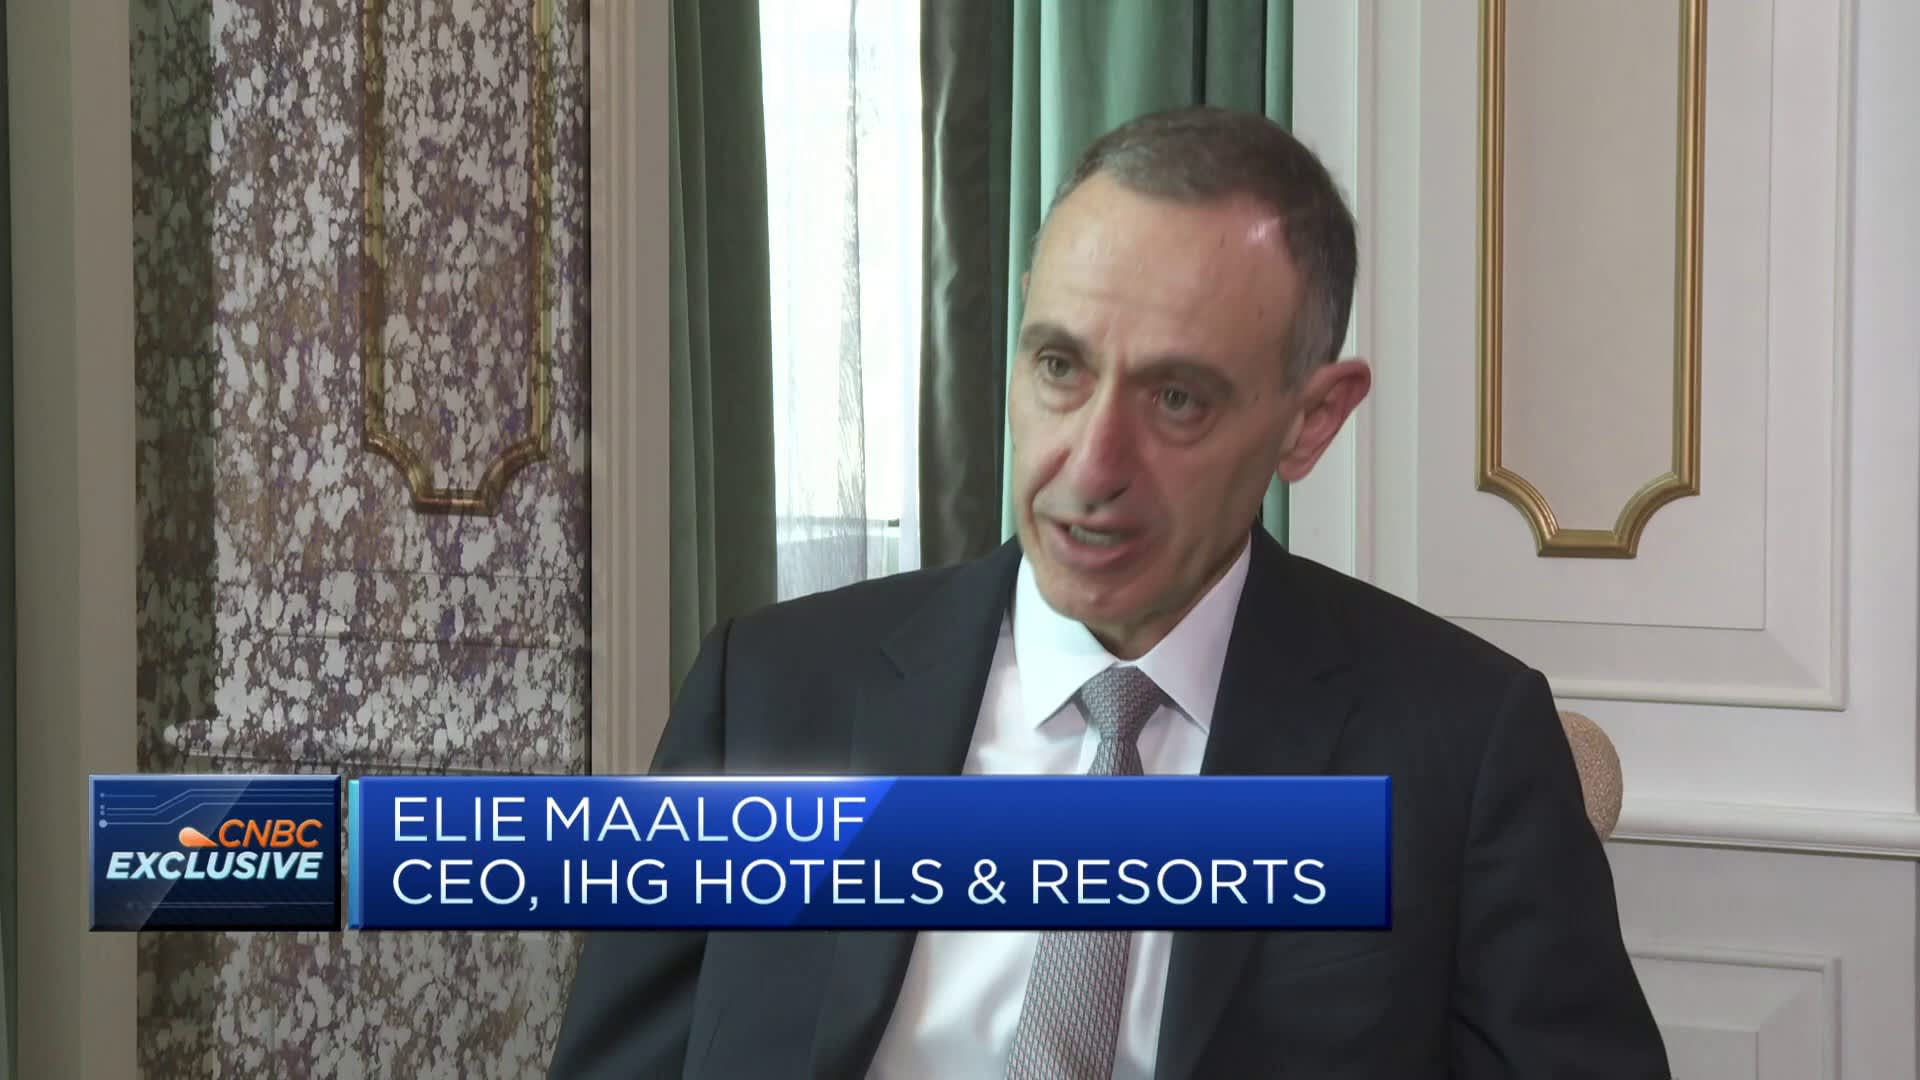 We're not moving our Middle East headquarters, says Intercontinental Hotels Group CEO